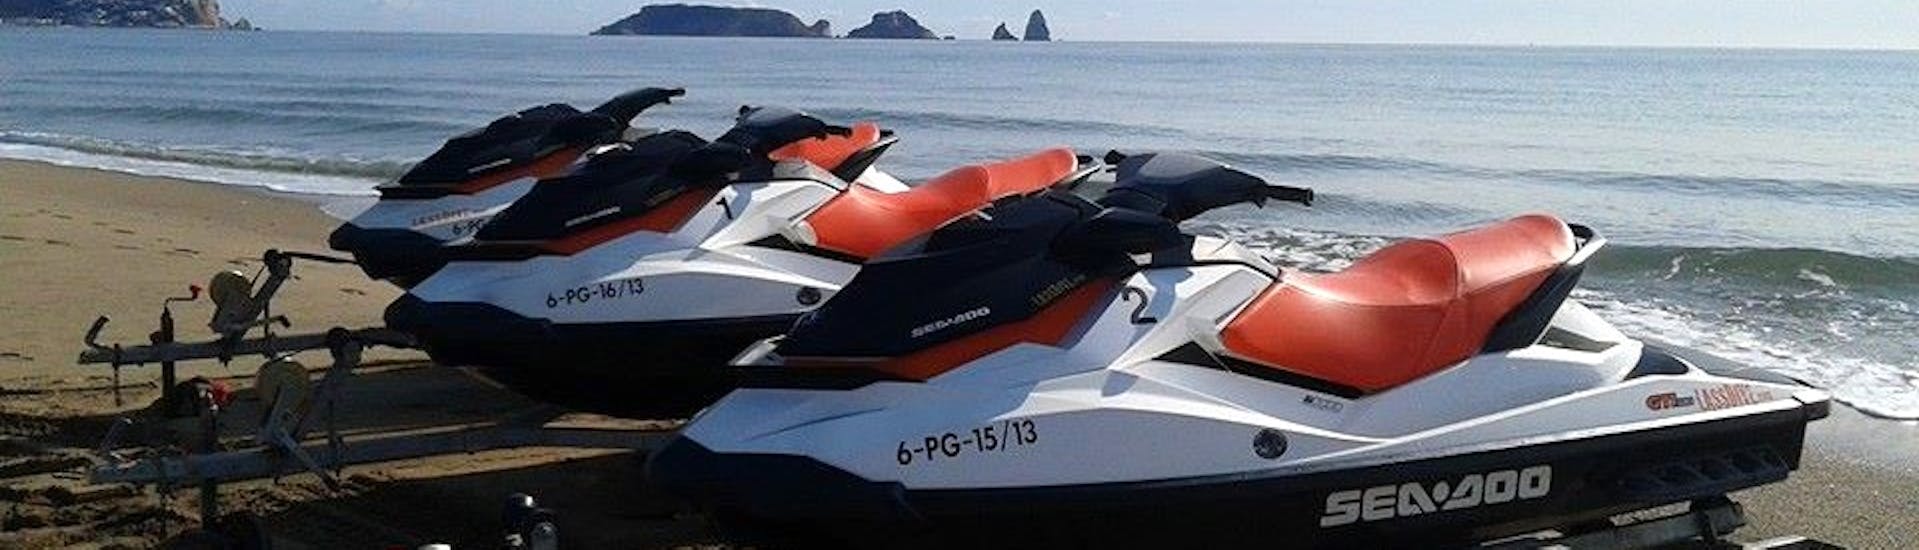 Some of our jet skis during a Jet Ski Safari to Medes Islands and Montgrí Coast with Lassdive.